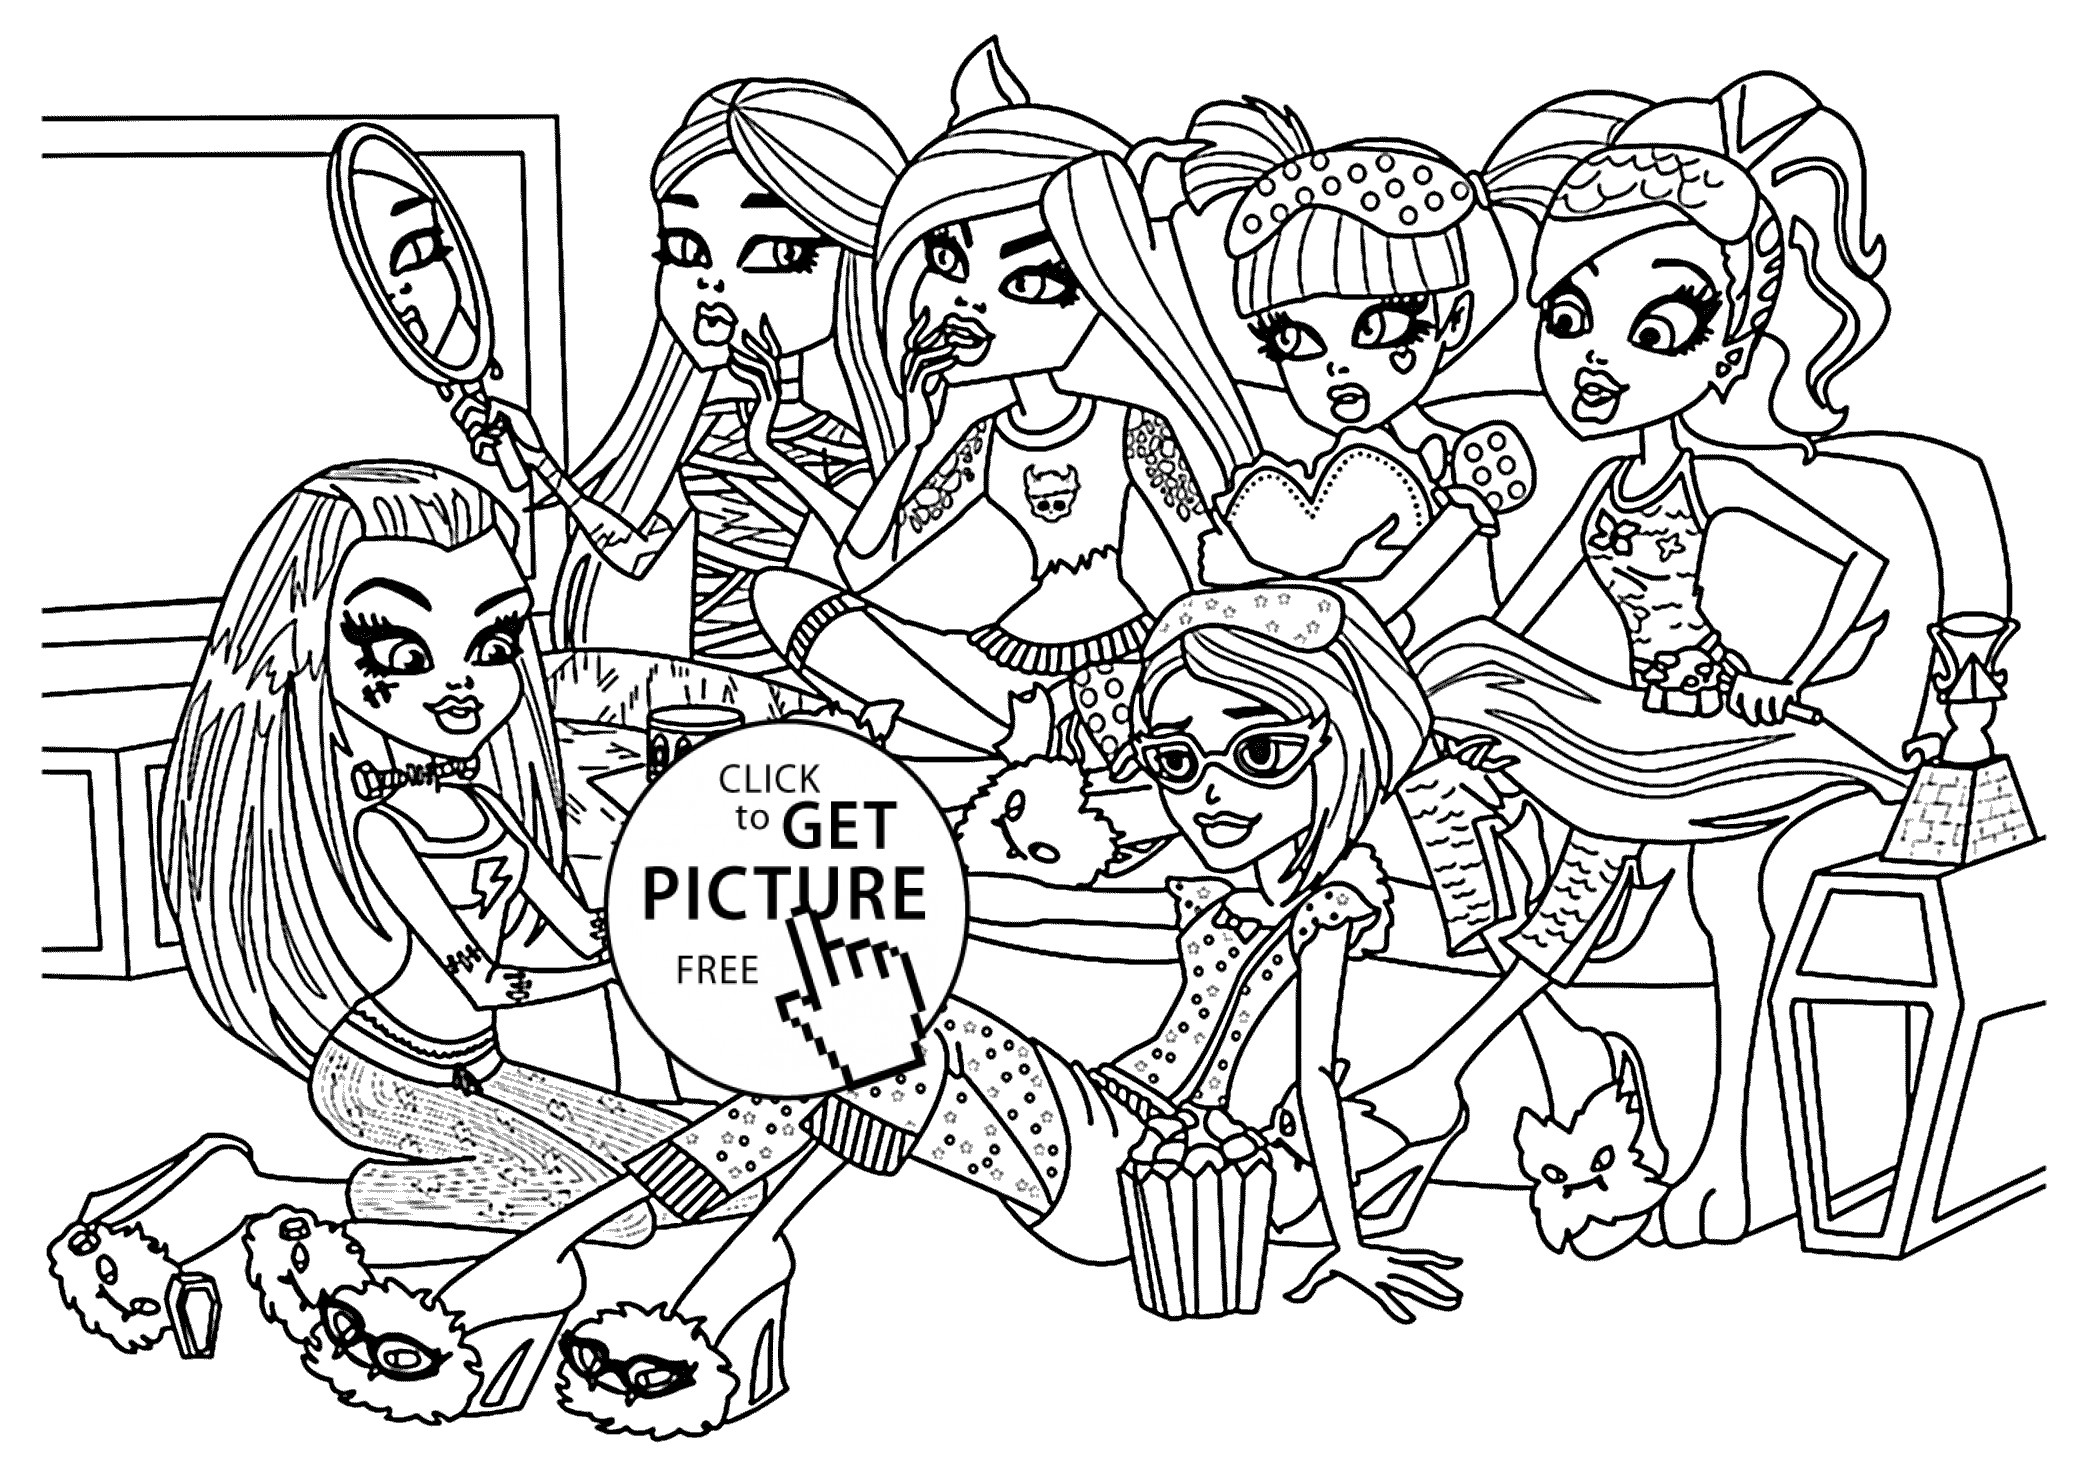 Coloring Pages For Girls Monster High Printable
 Monster high coloring pages for kids printable free